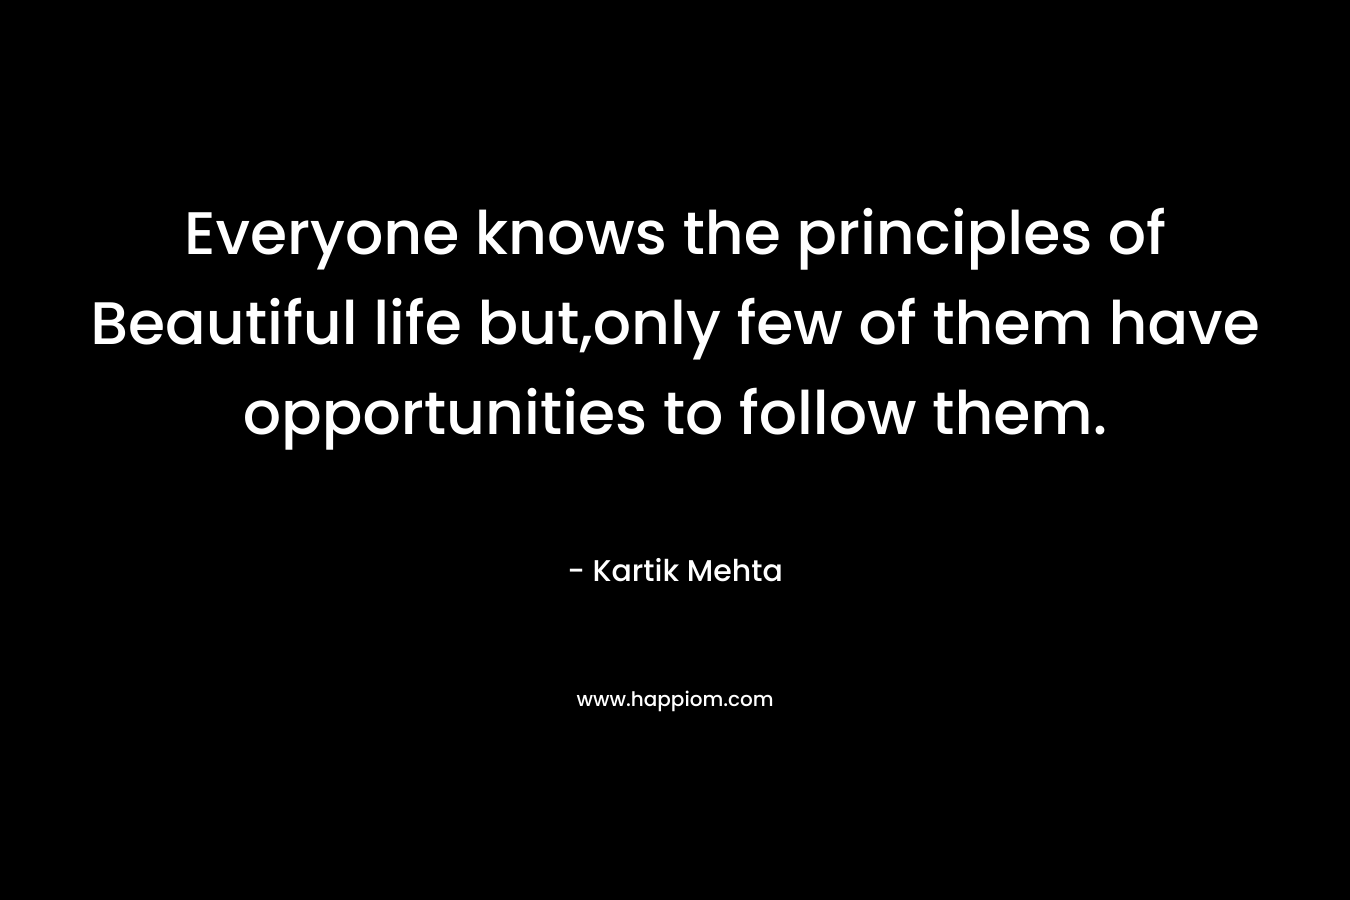 Everyone knows the principles of Beautiful life but,only few of them have opportunities to follow them. – Kartik Mehta